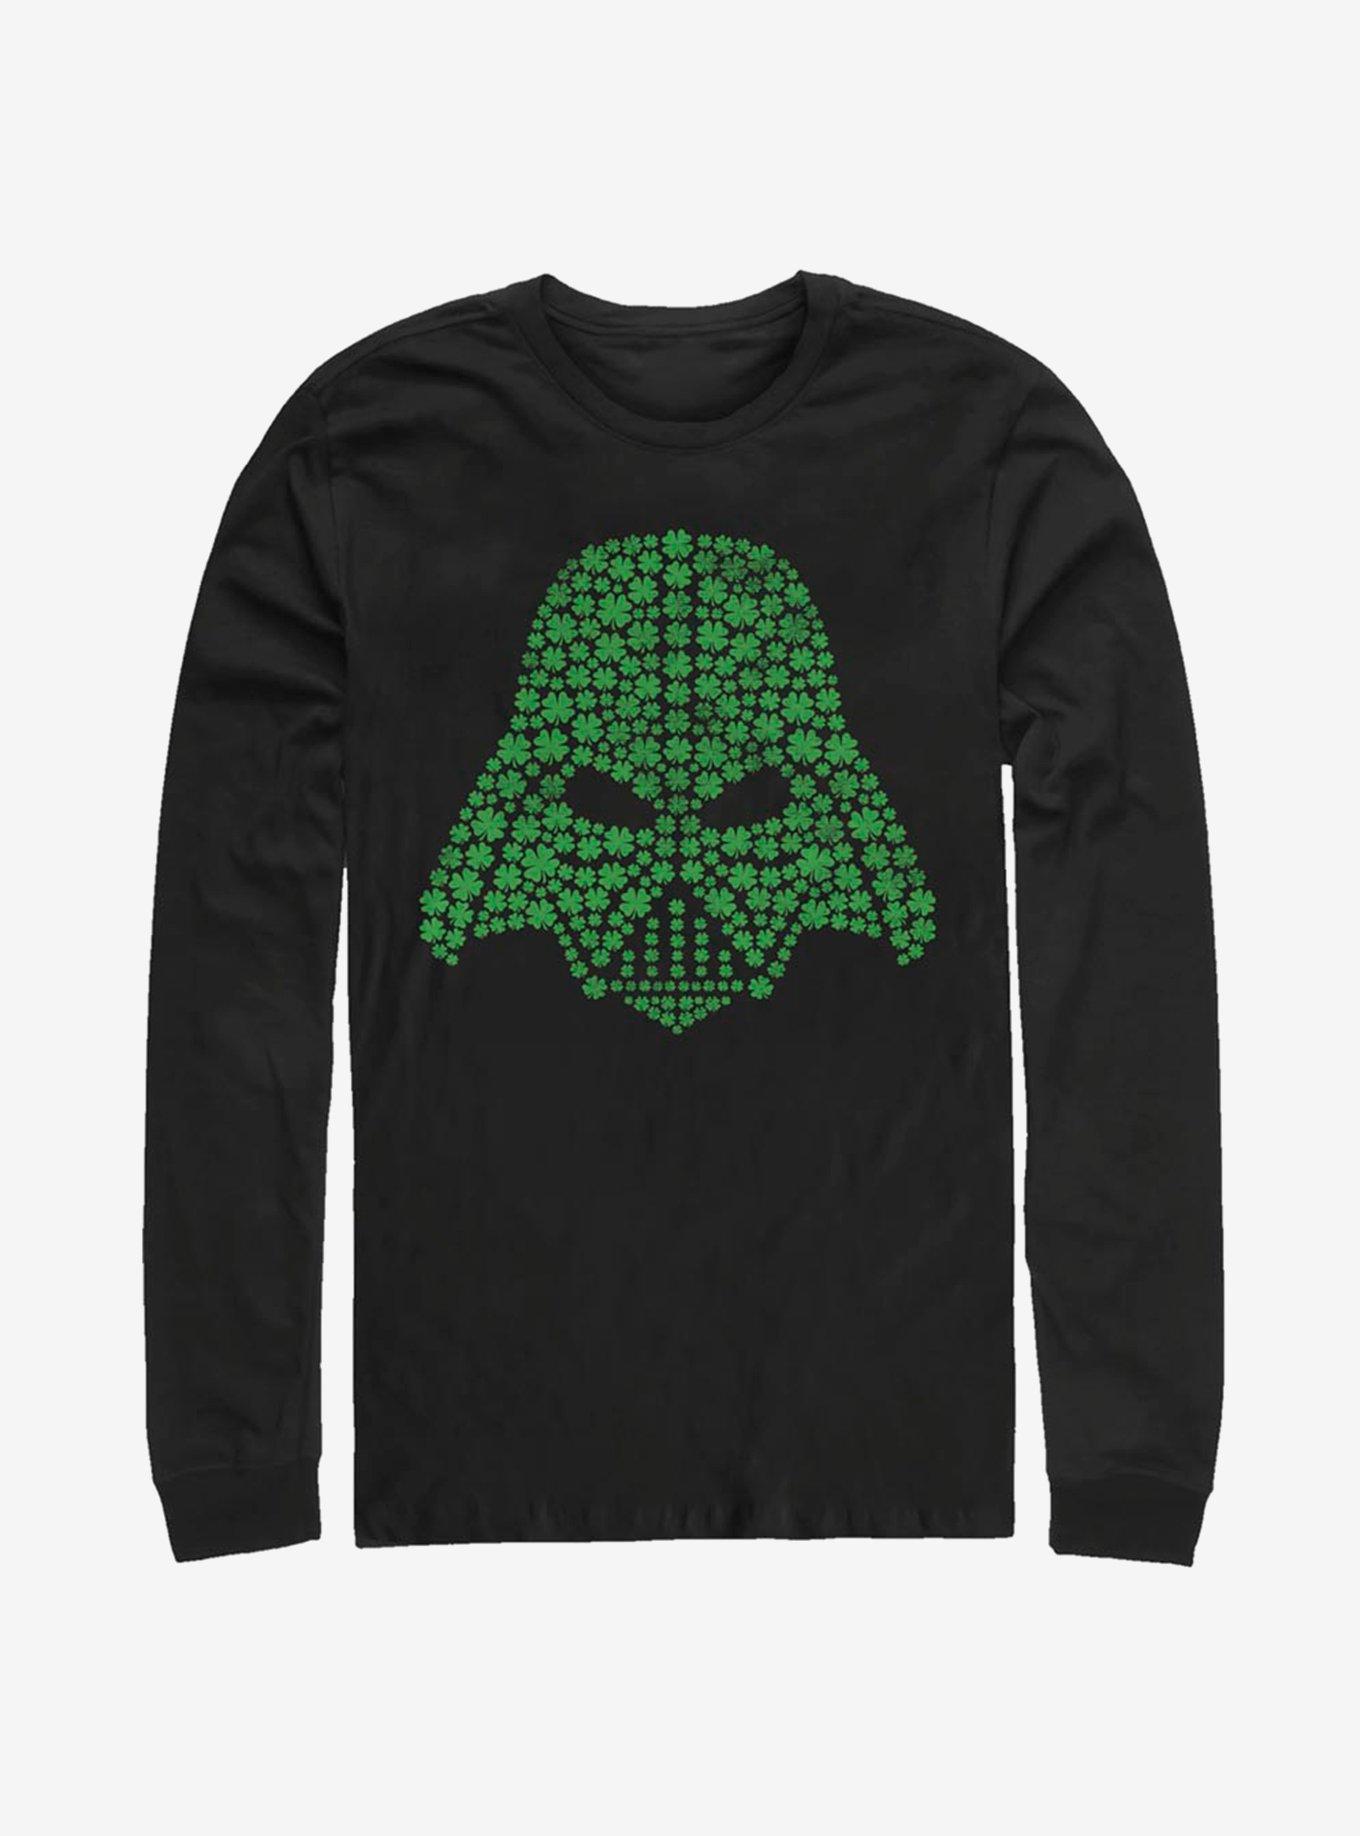 Star Wars Sith Out Of Luck Long-Sleeve T-Shirt, BLACK, hi-res